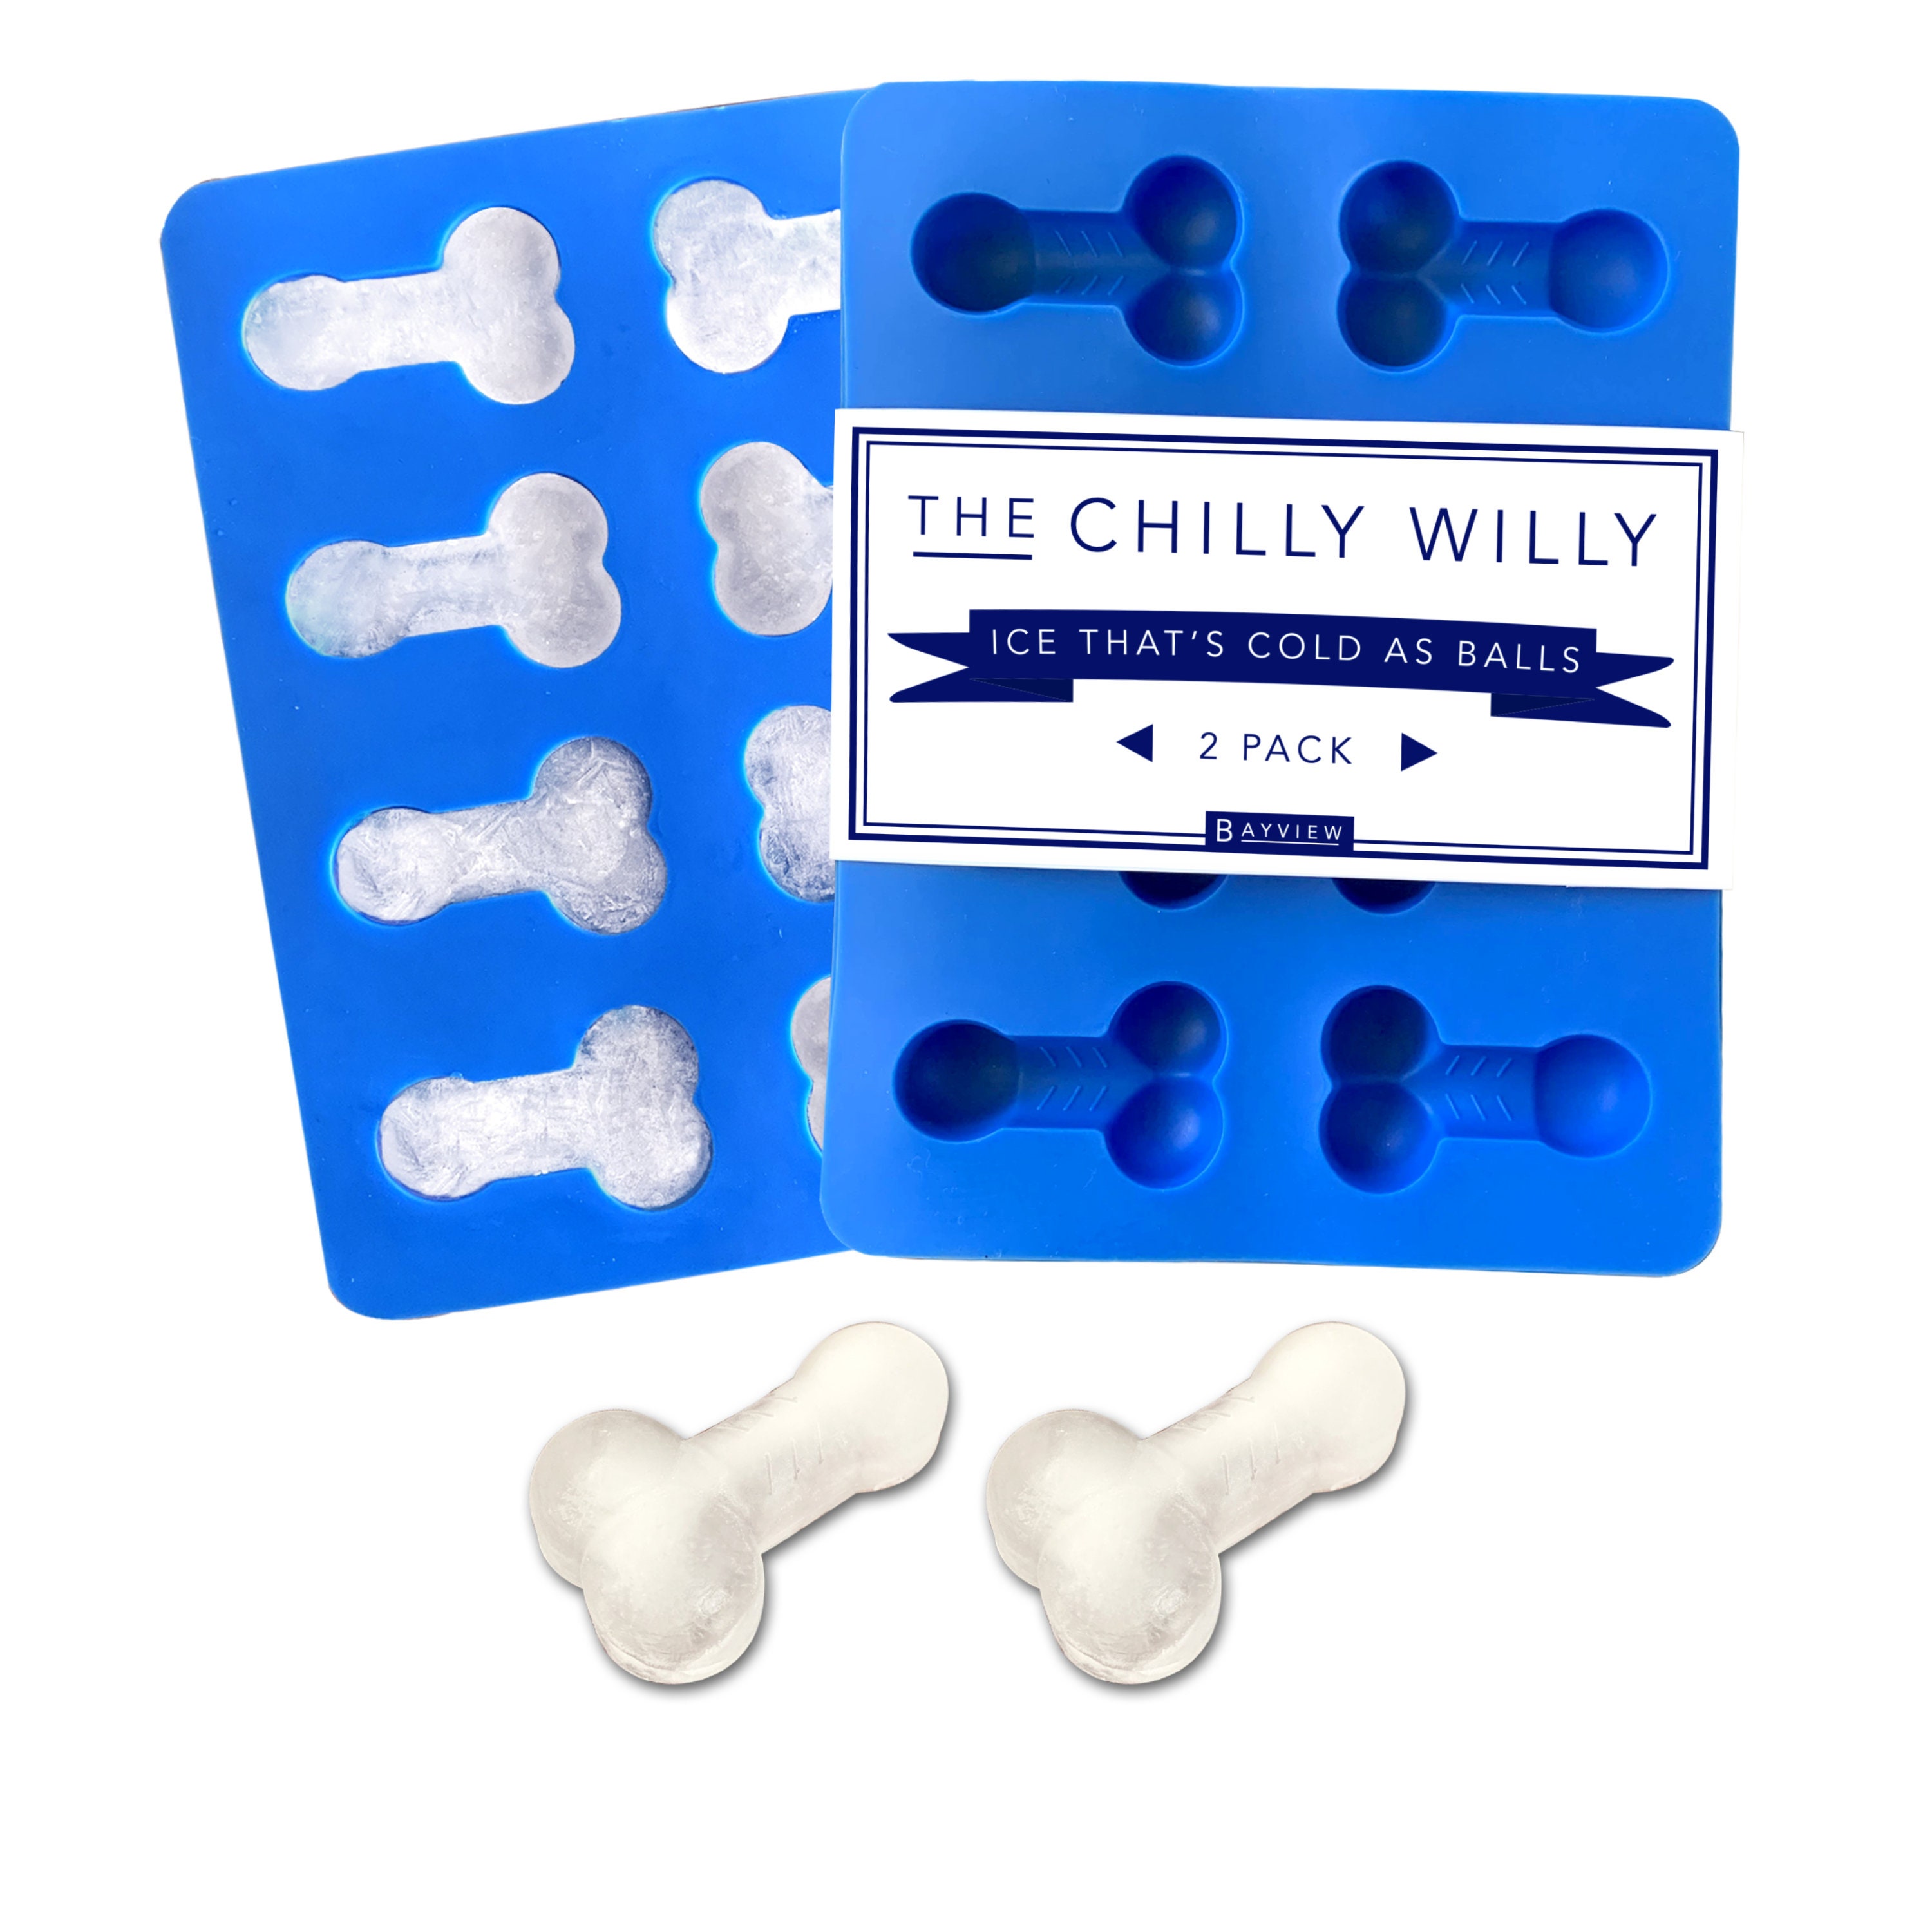 Silicone Ice Cube Mold Funny Man Genital Shaped Ice Cube for